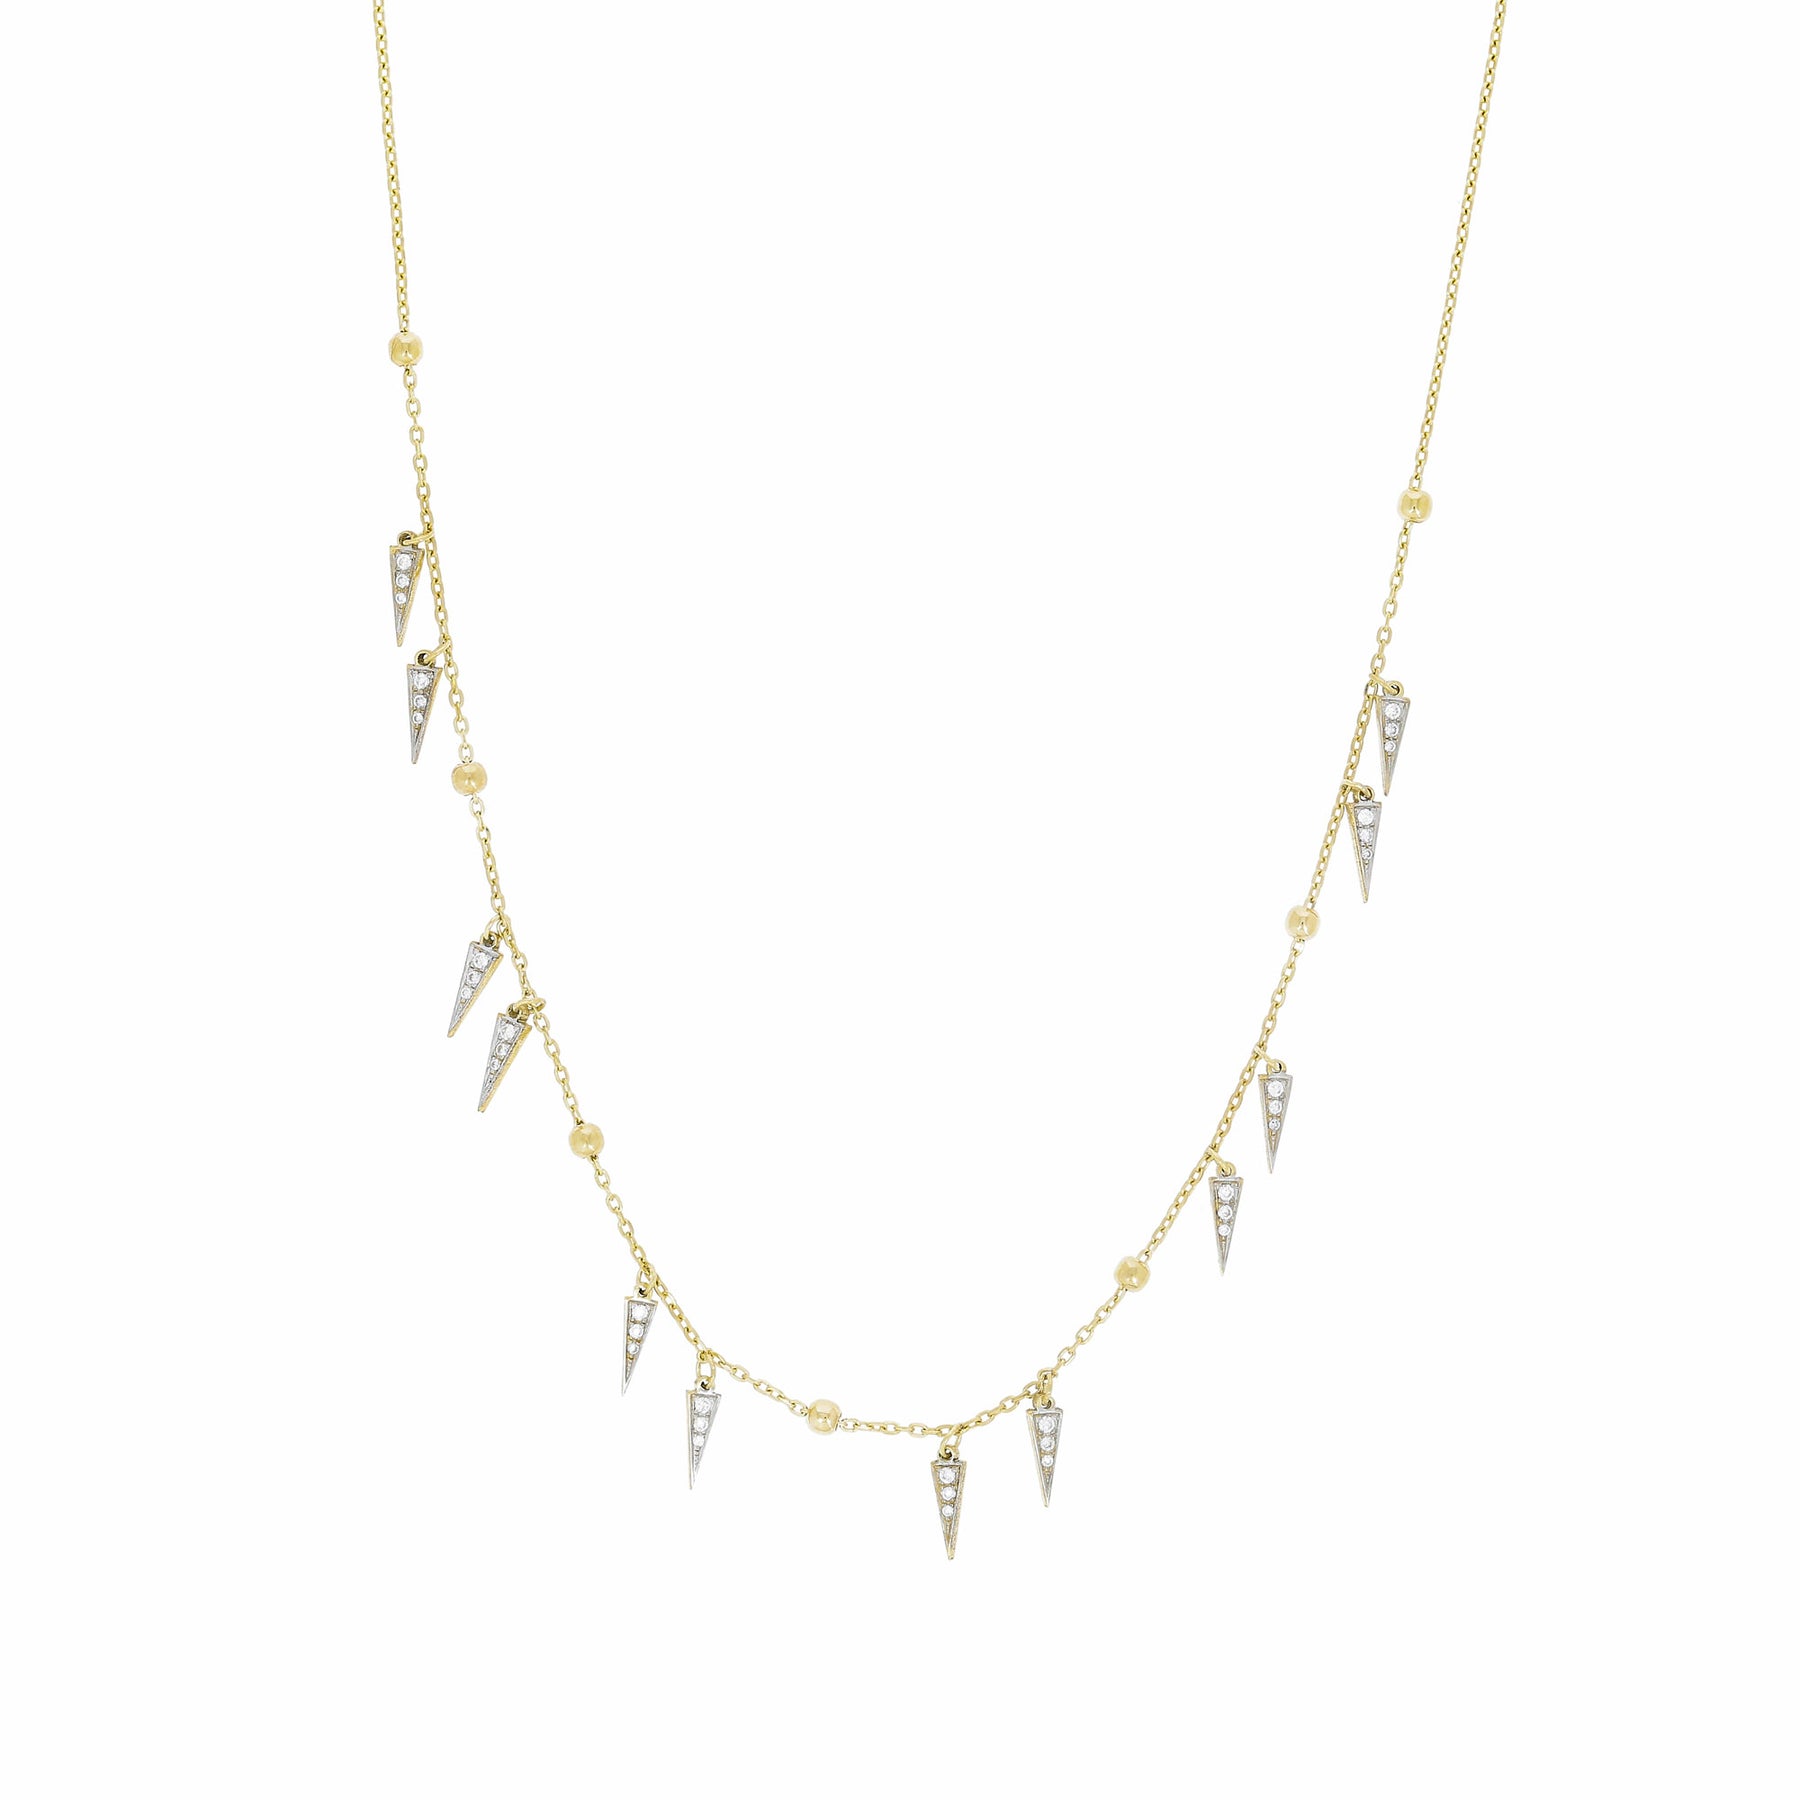 Spikes on Chain Choker Necklace